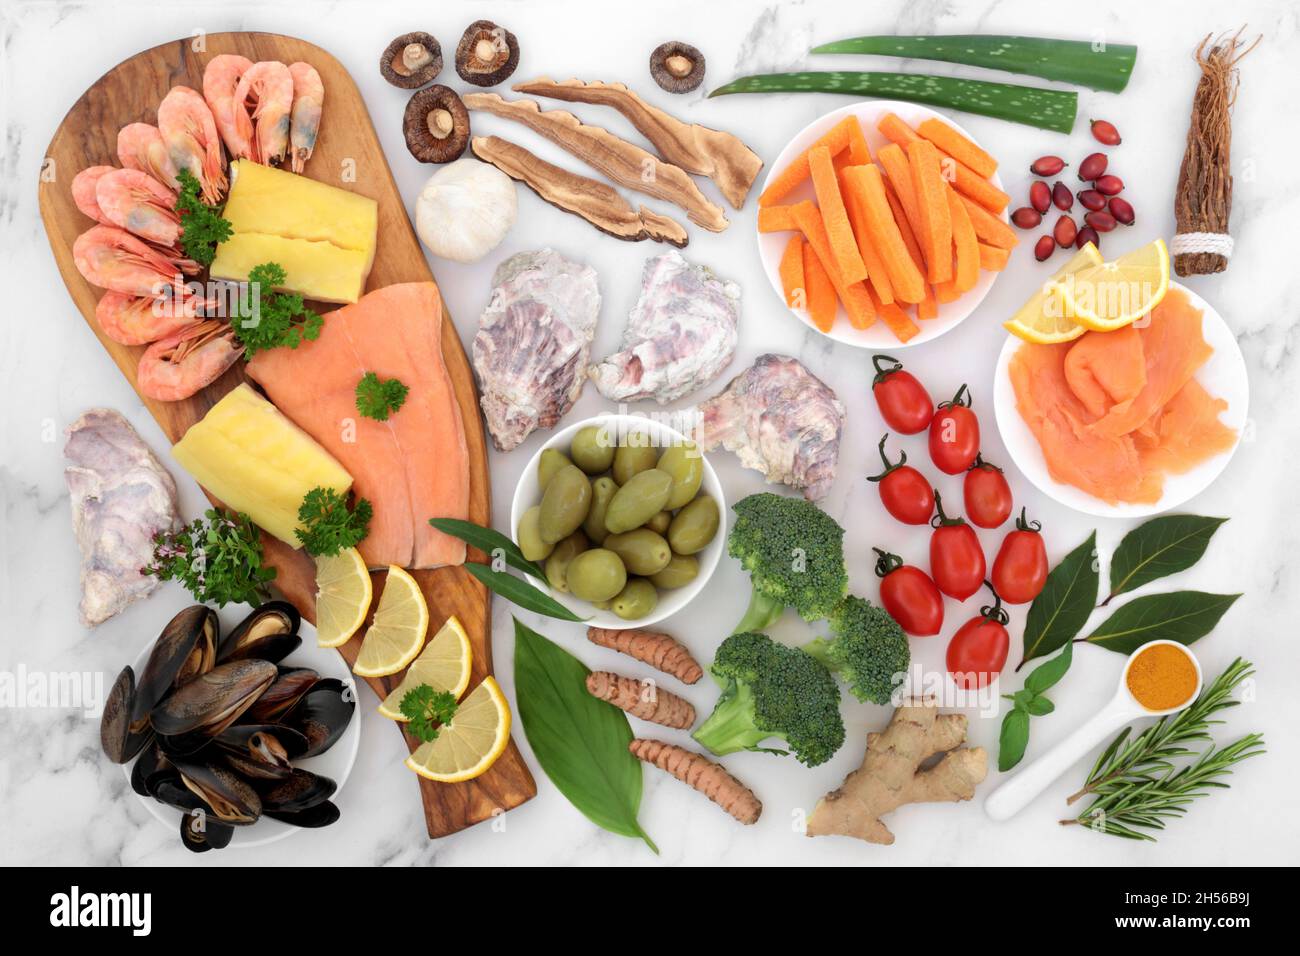 Immune system boosting health food collection. Seafood, vegetables, fruit, medicinal herbs and spice. High in antioxidants, anthocyanins, protein. Stock Photo